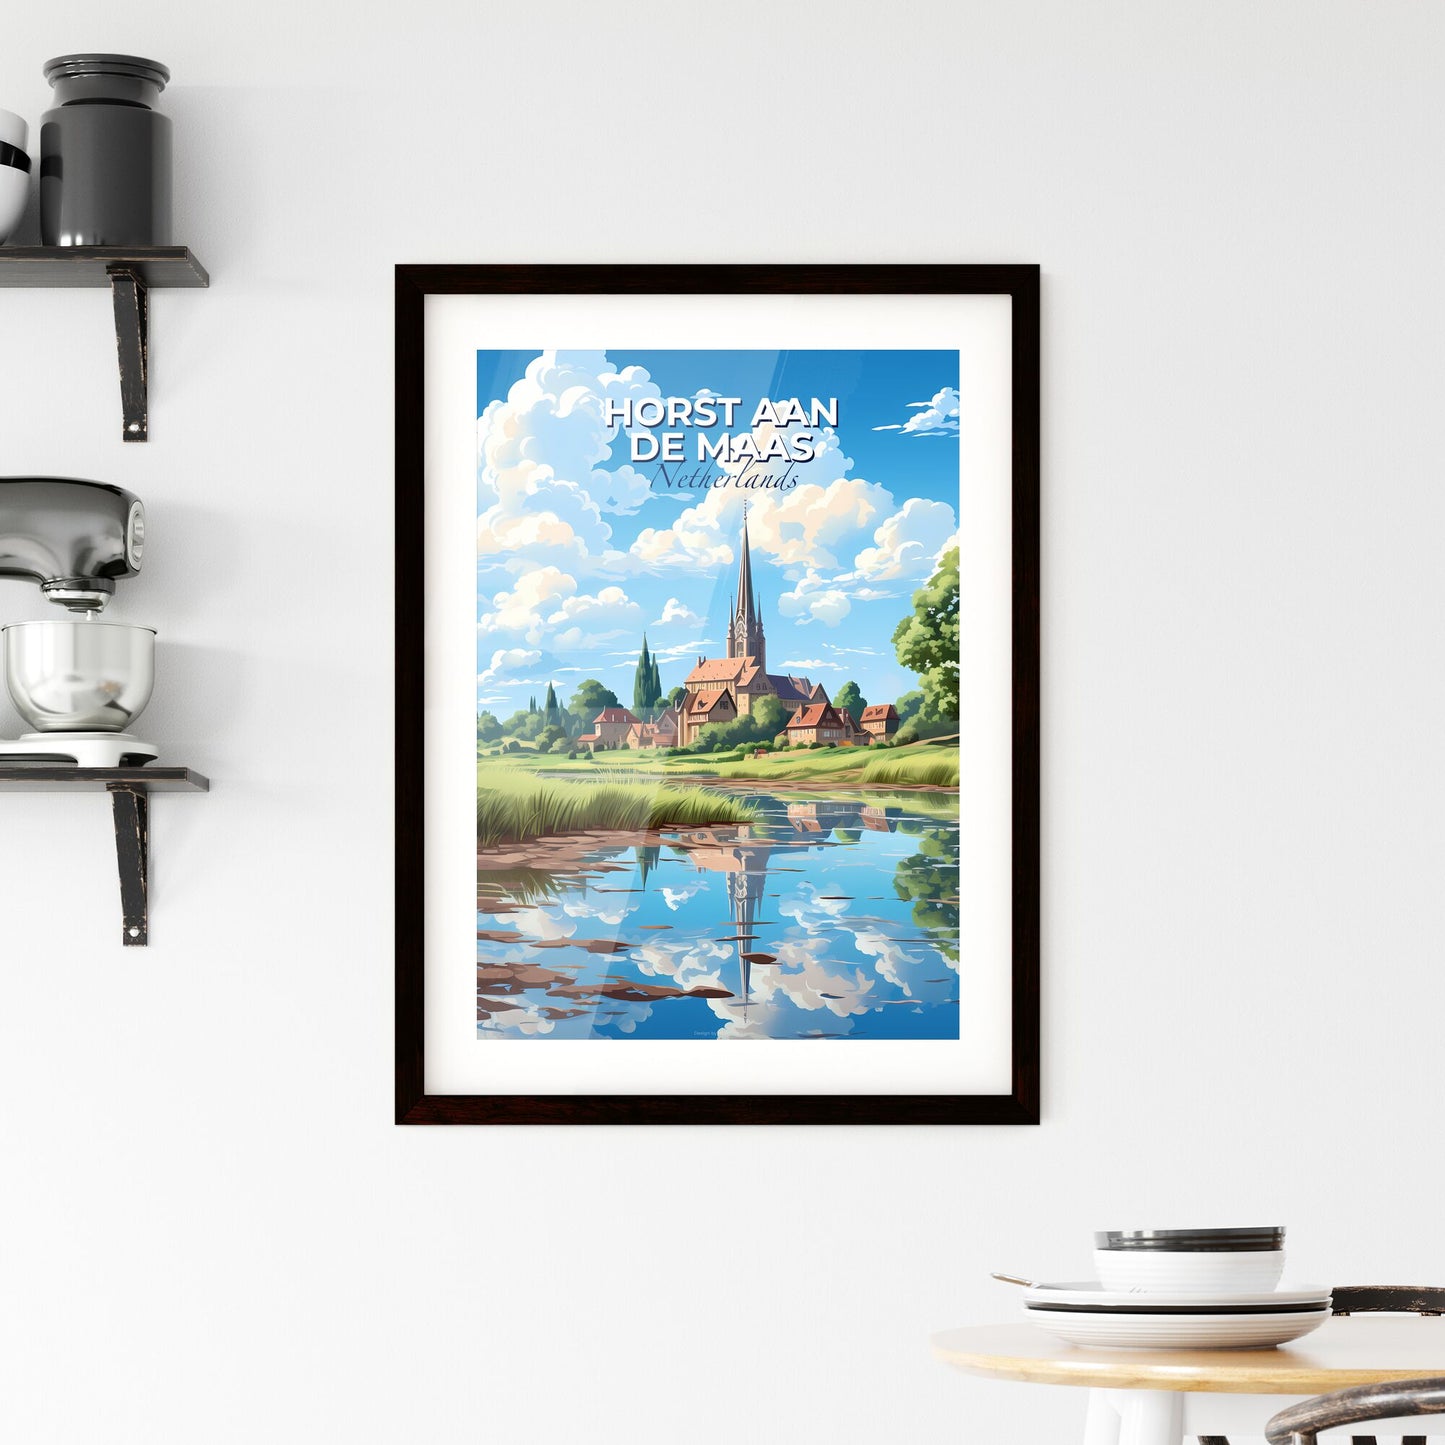 Horst Aan De Maas, Netherlands, A Poster of a water body with a building and trees Default Title